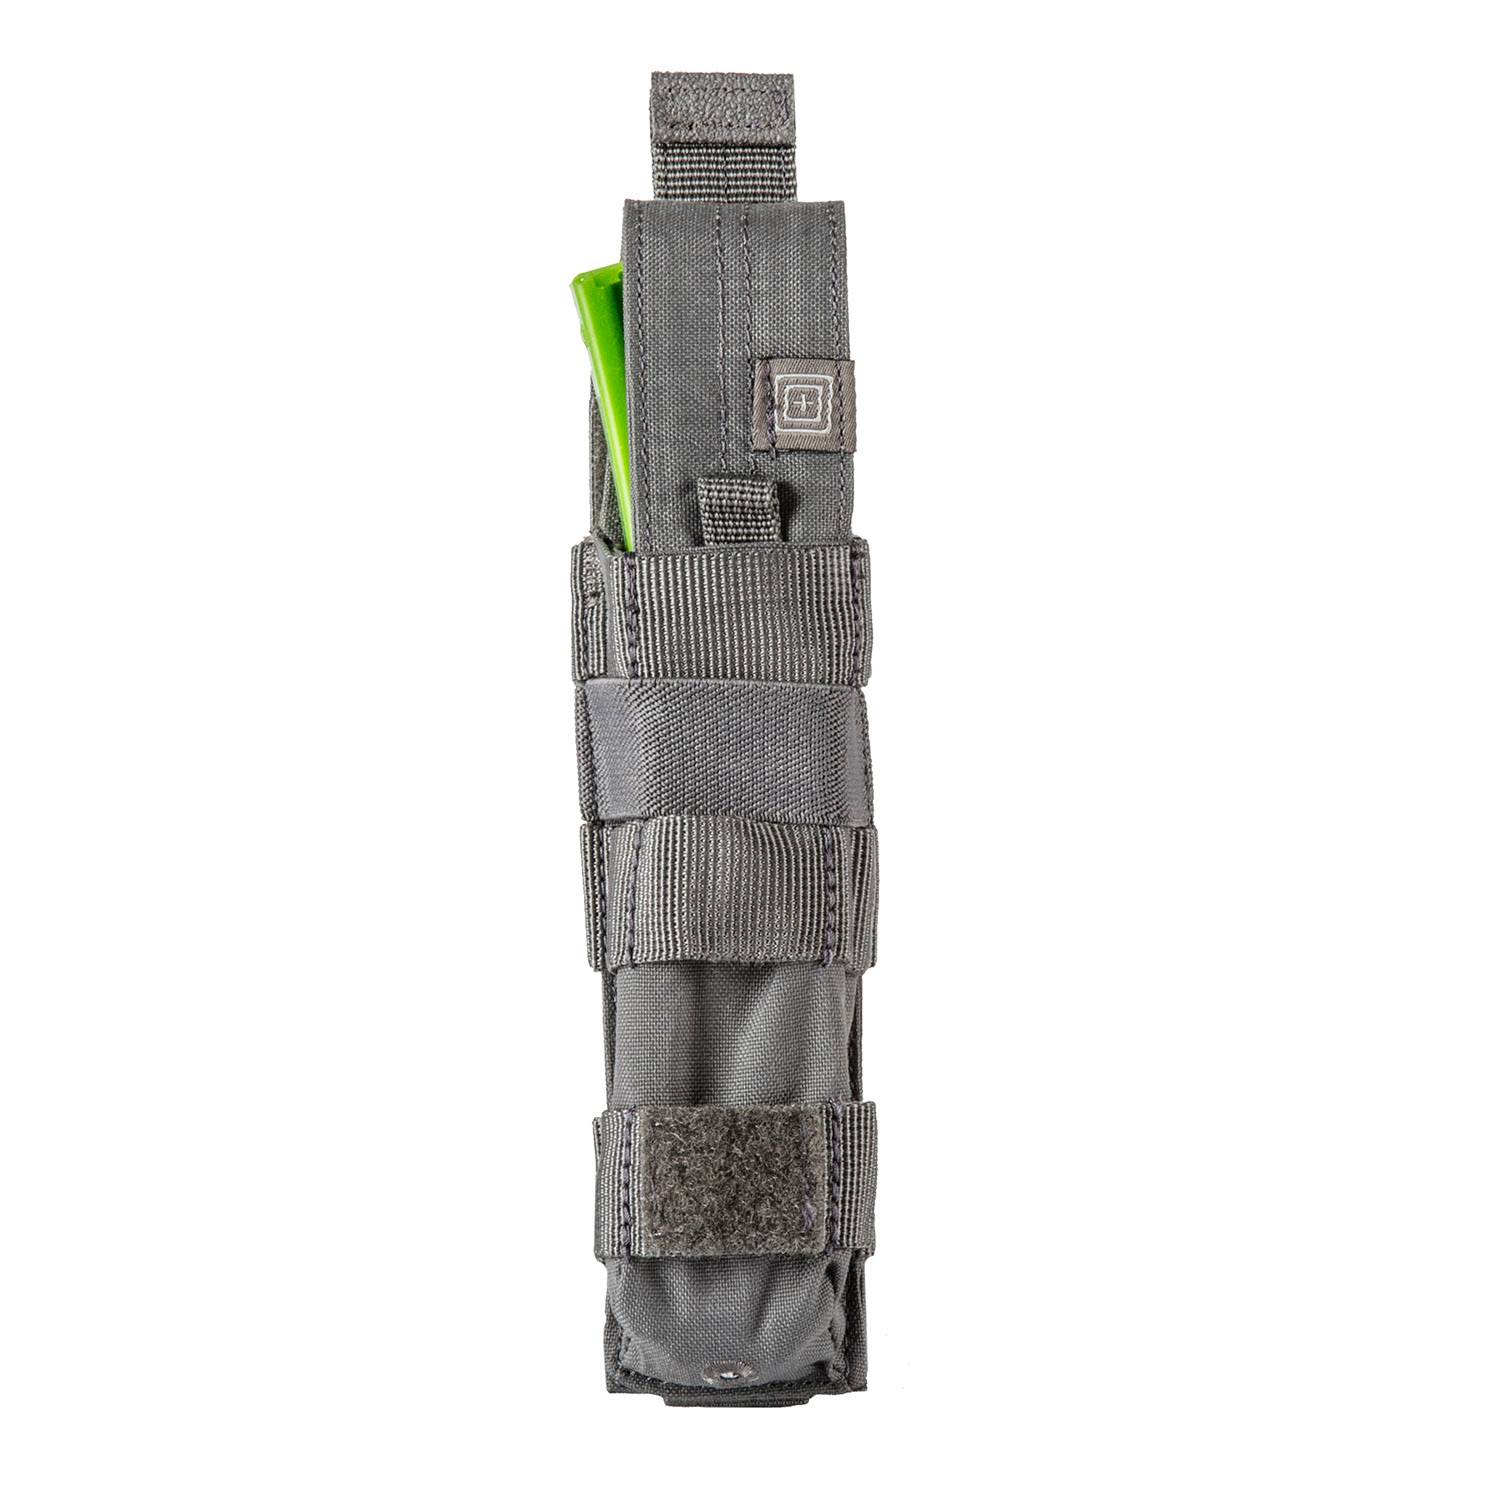 5.11 TACTICAL MP5 BUNGEE/COVER SINGLE-LX